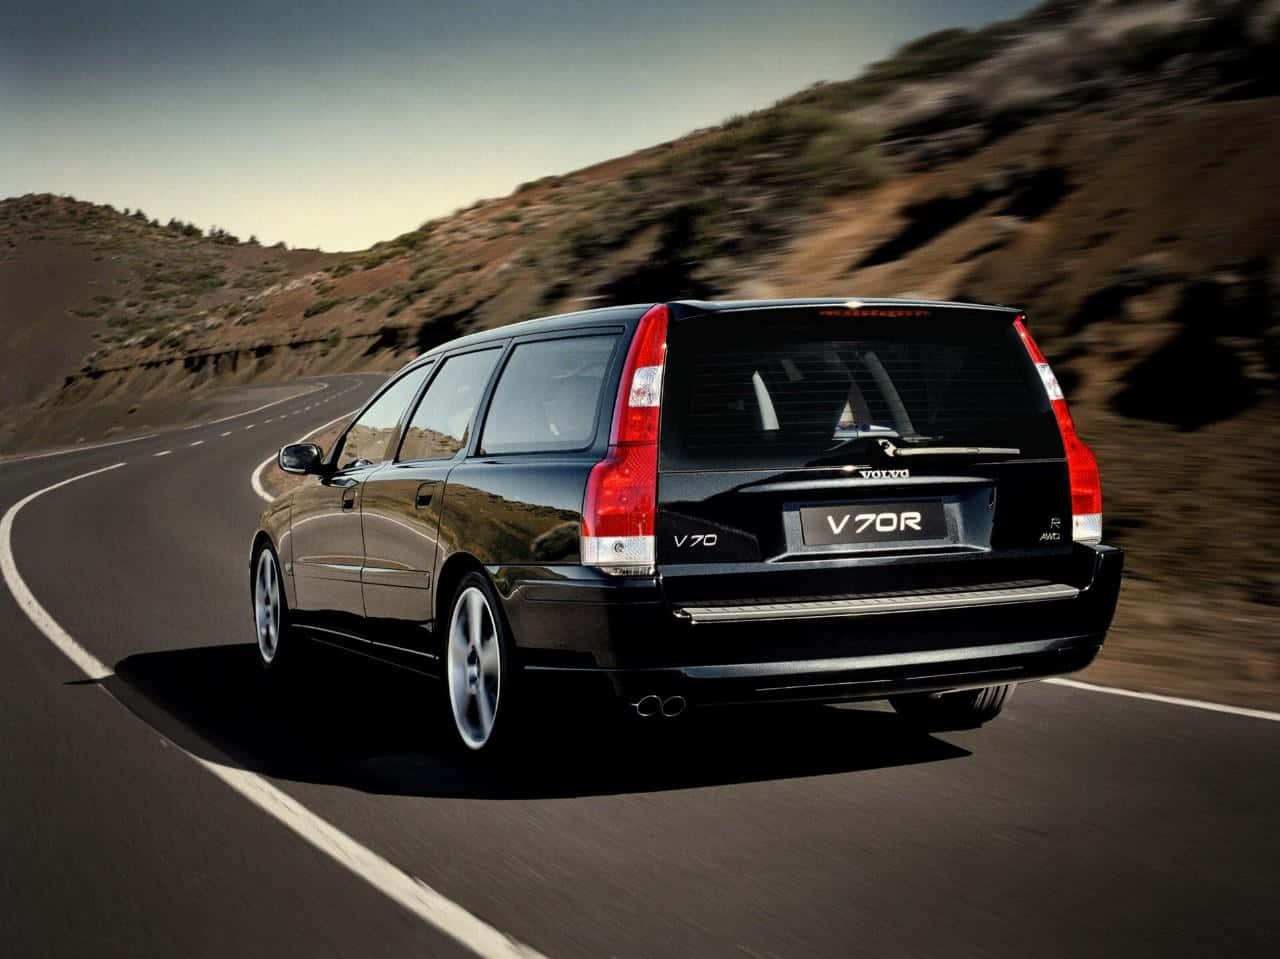 Captivating Volvo V70 In Its Glory Wallpaper